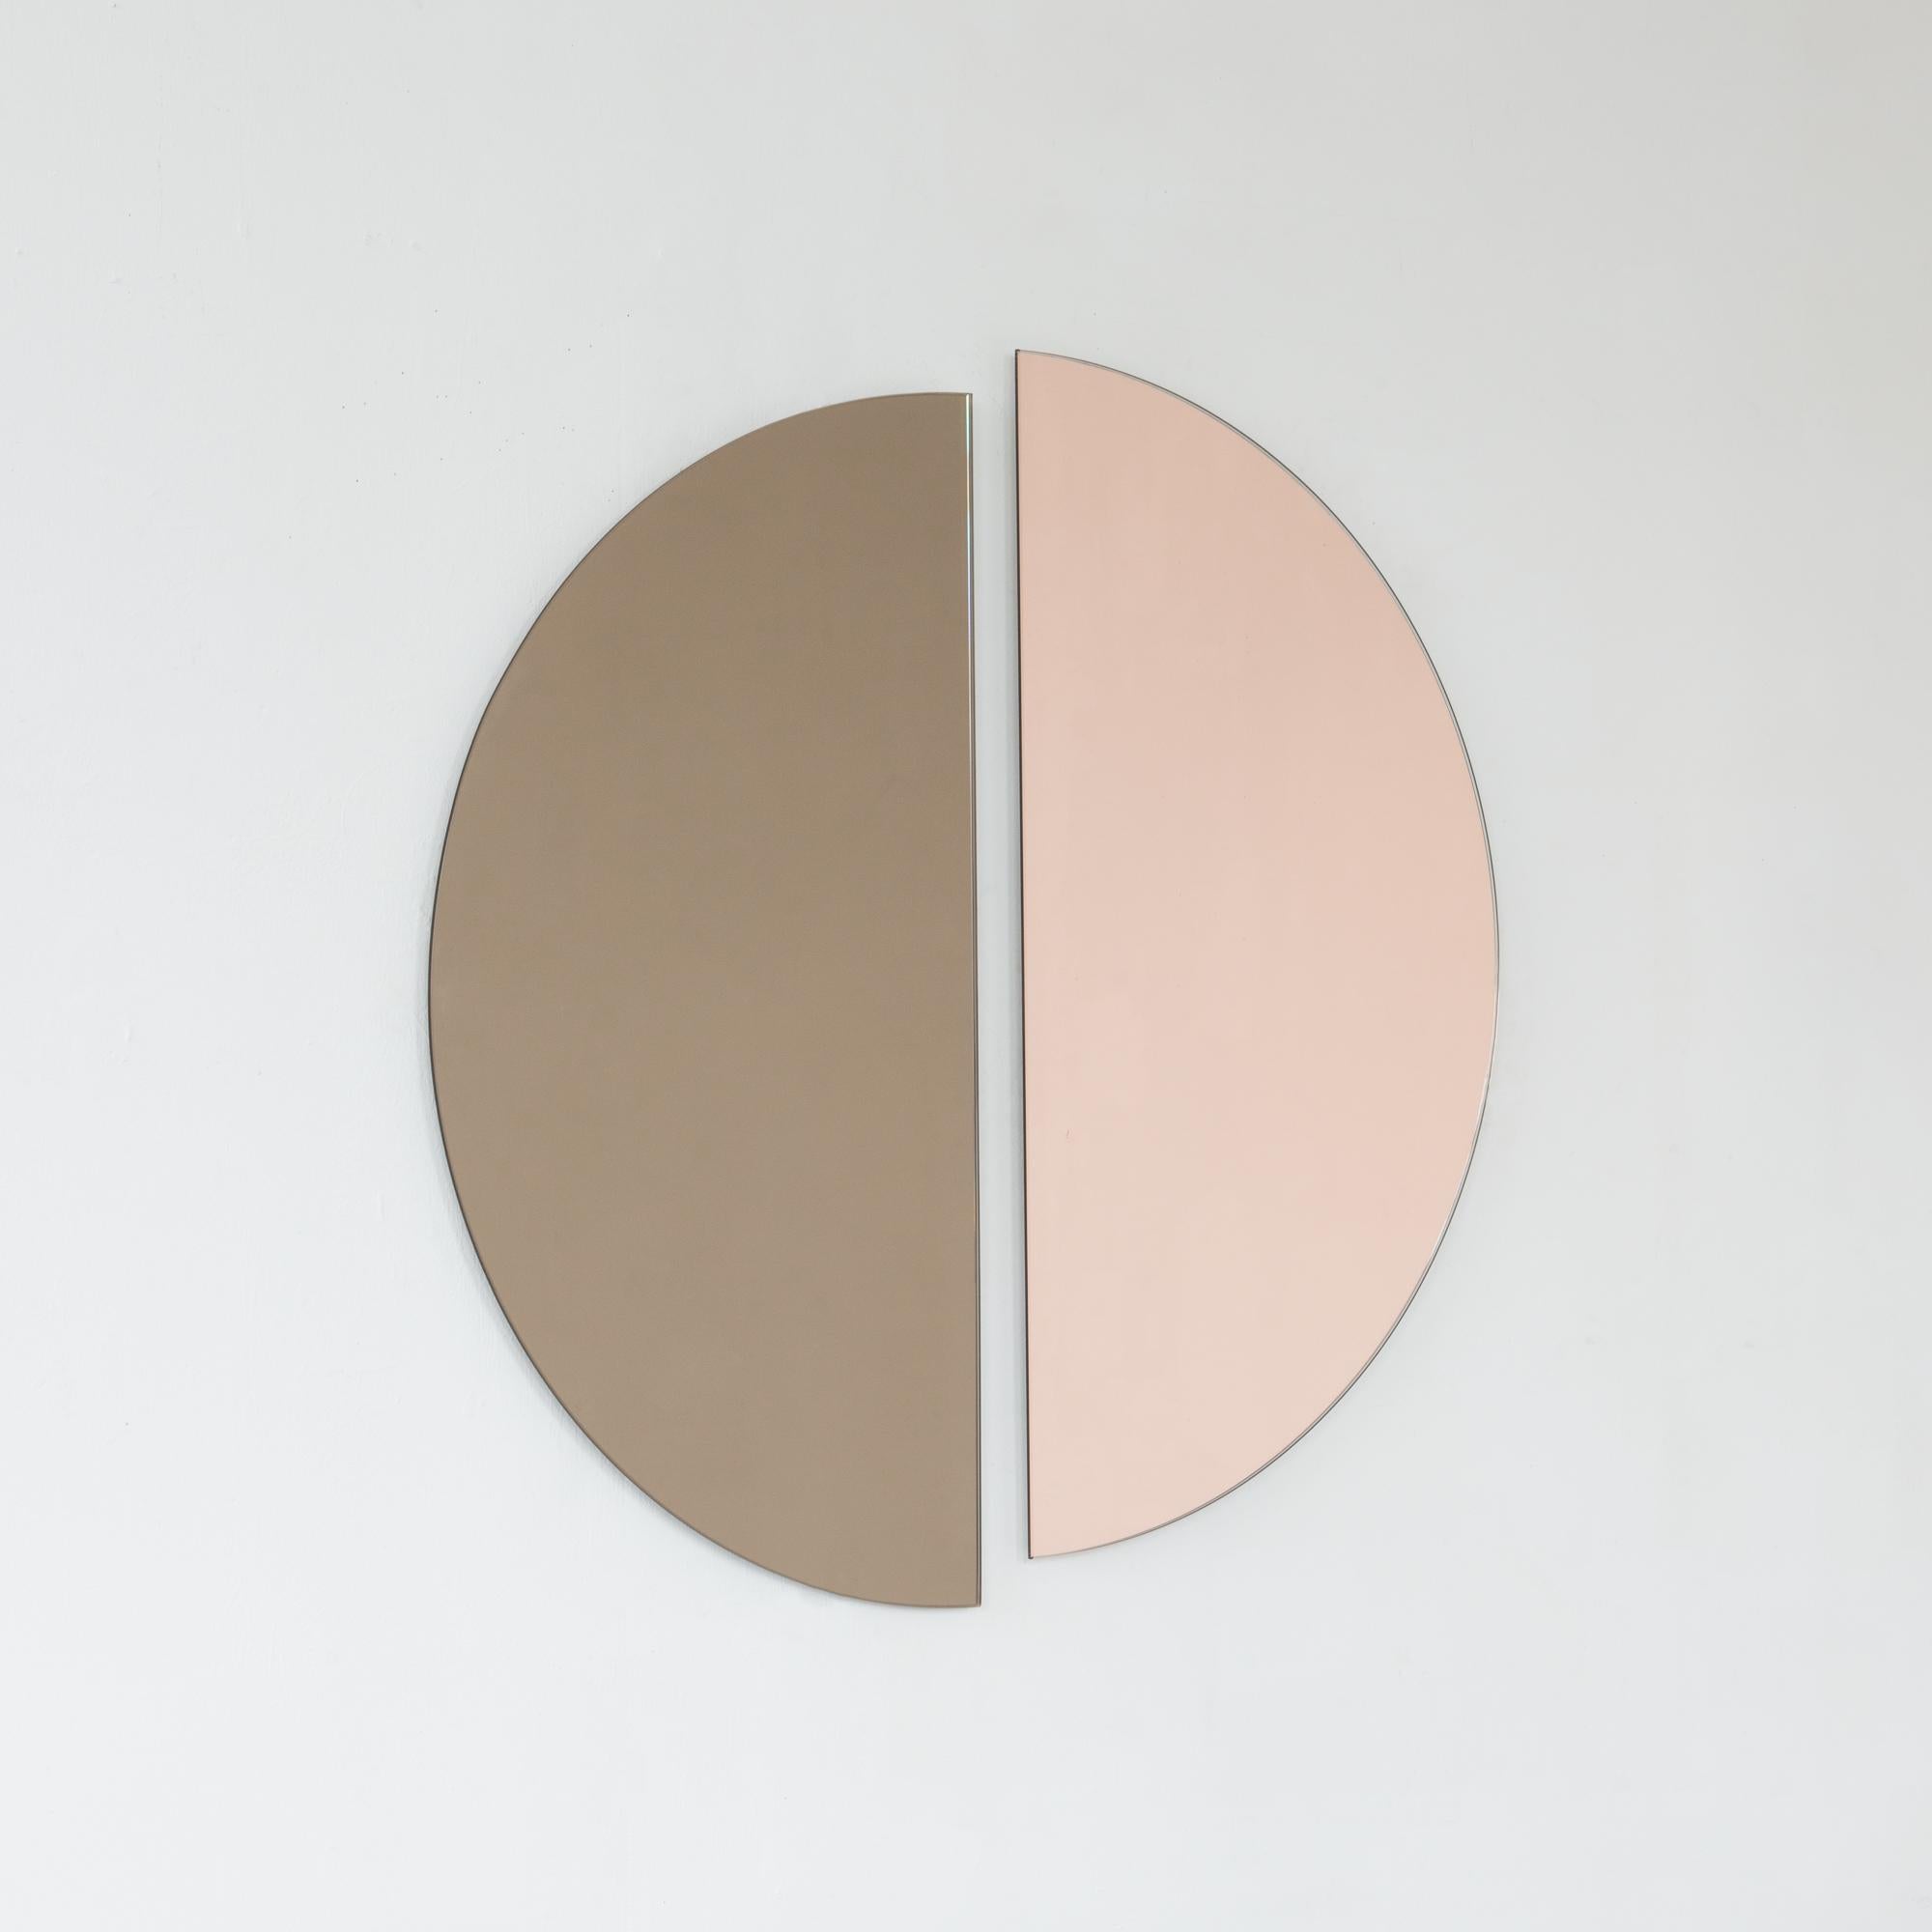 Set of two minimalist half-moon Luna™ bronze + rose gold (peach) tinted frameless mirrors with a floating effect. Fitted with a quality and ingenious hanging system for a flexible installation in 4 different directions. Designed and made in London,